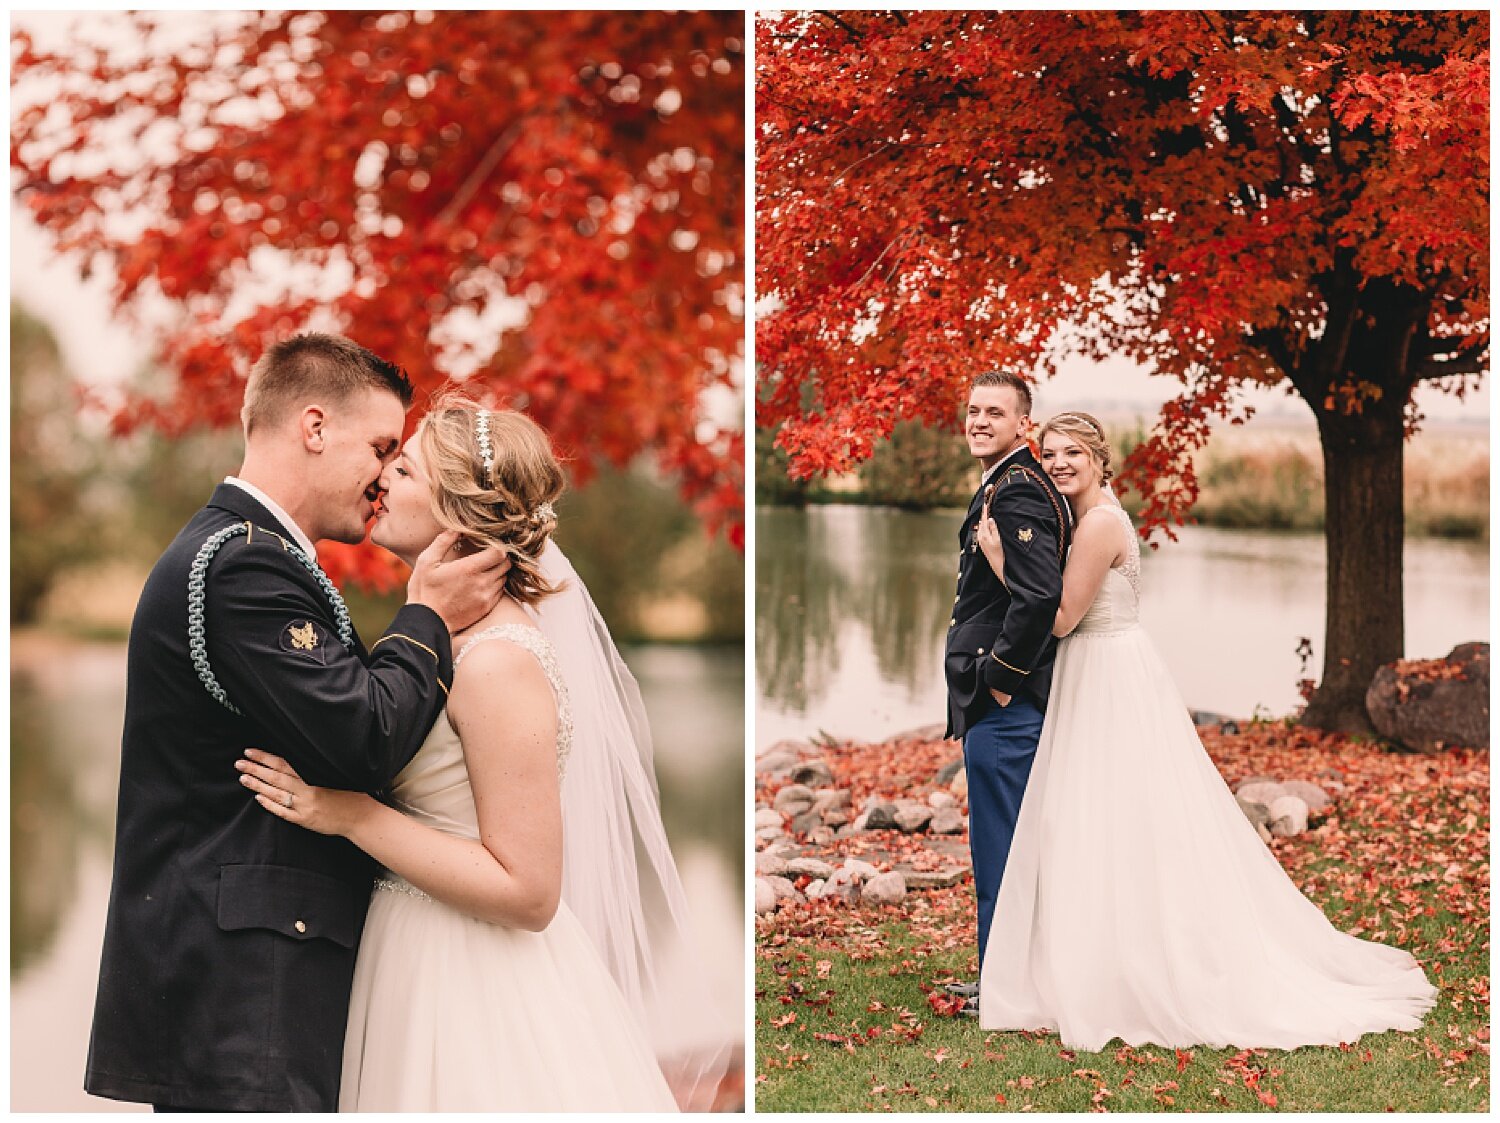  This tree was the most perfect backdrop for an October wedding!  